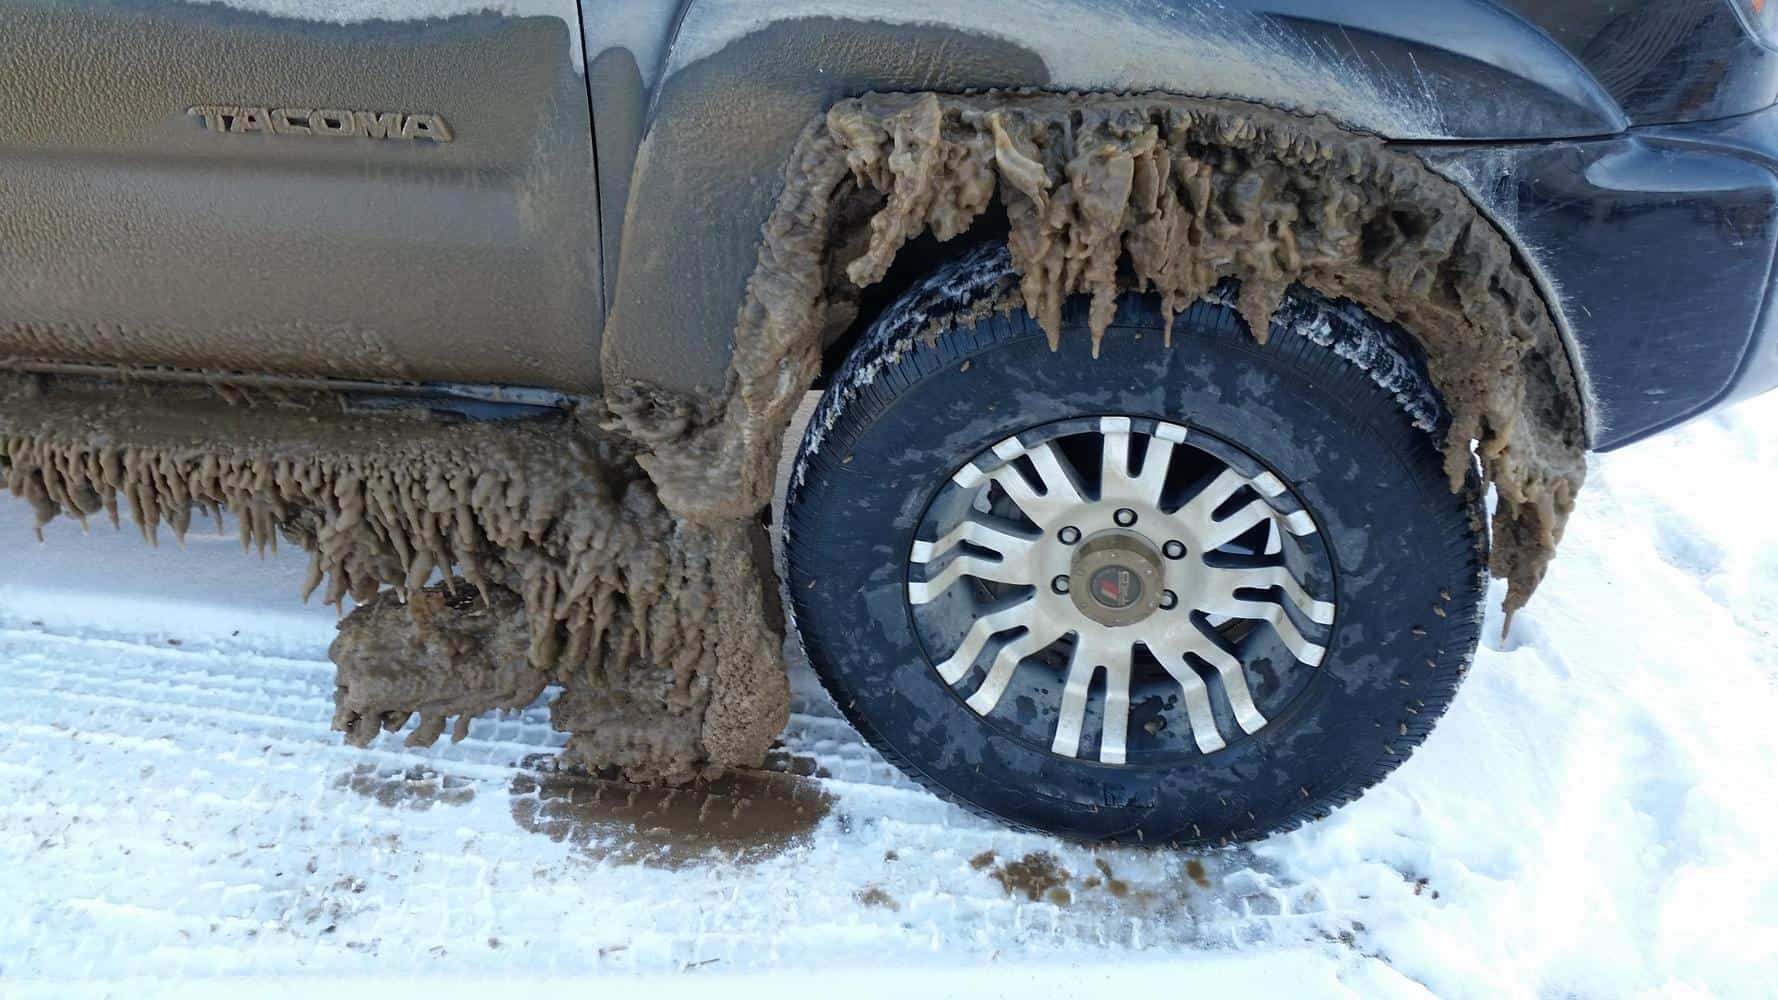 Clear snow and ice from your tire wells before you drive